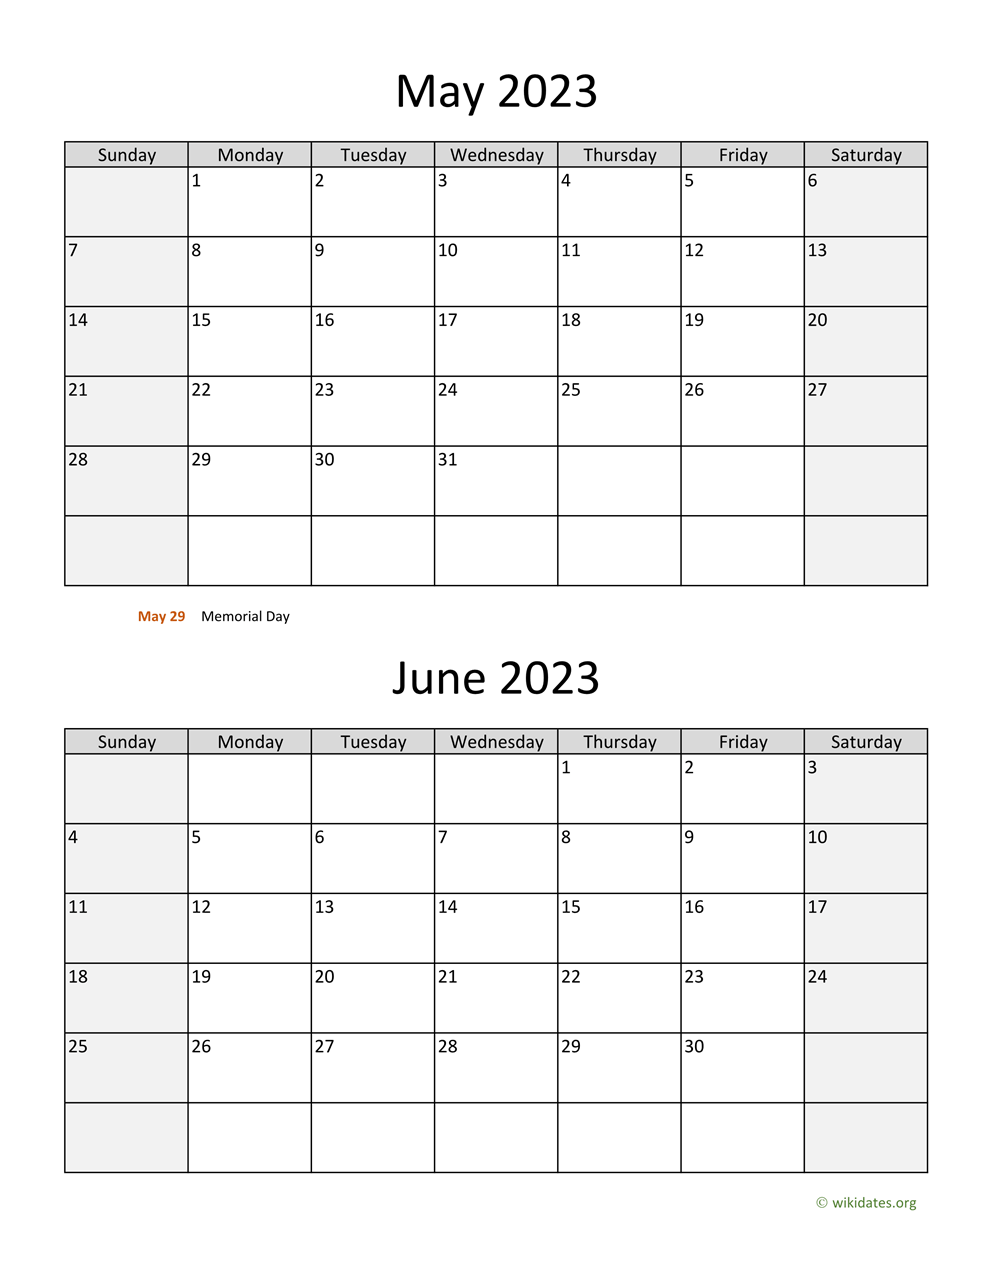 printable-calendar-may-and-june-2023-get-your-hands-on-amazing-free